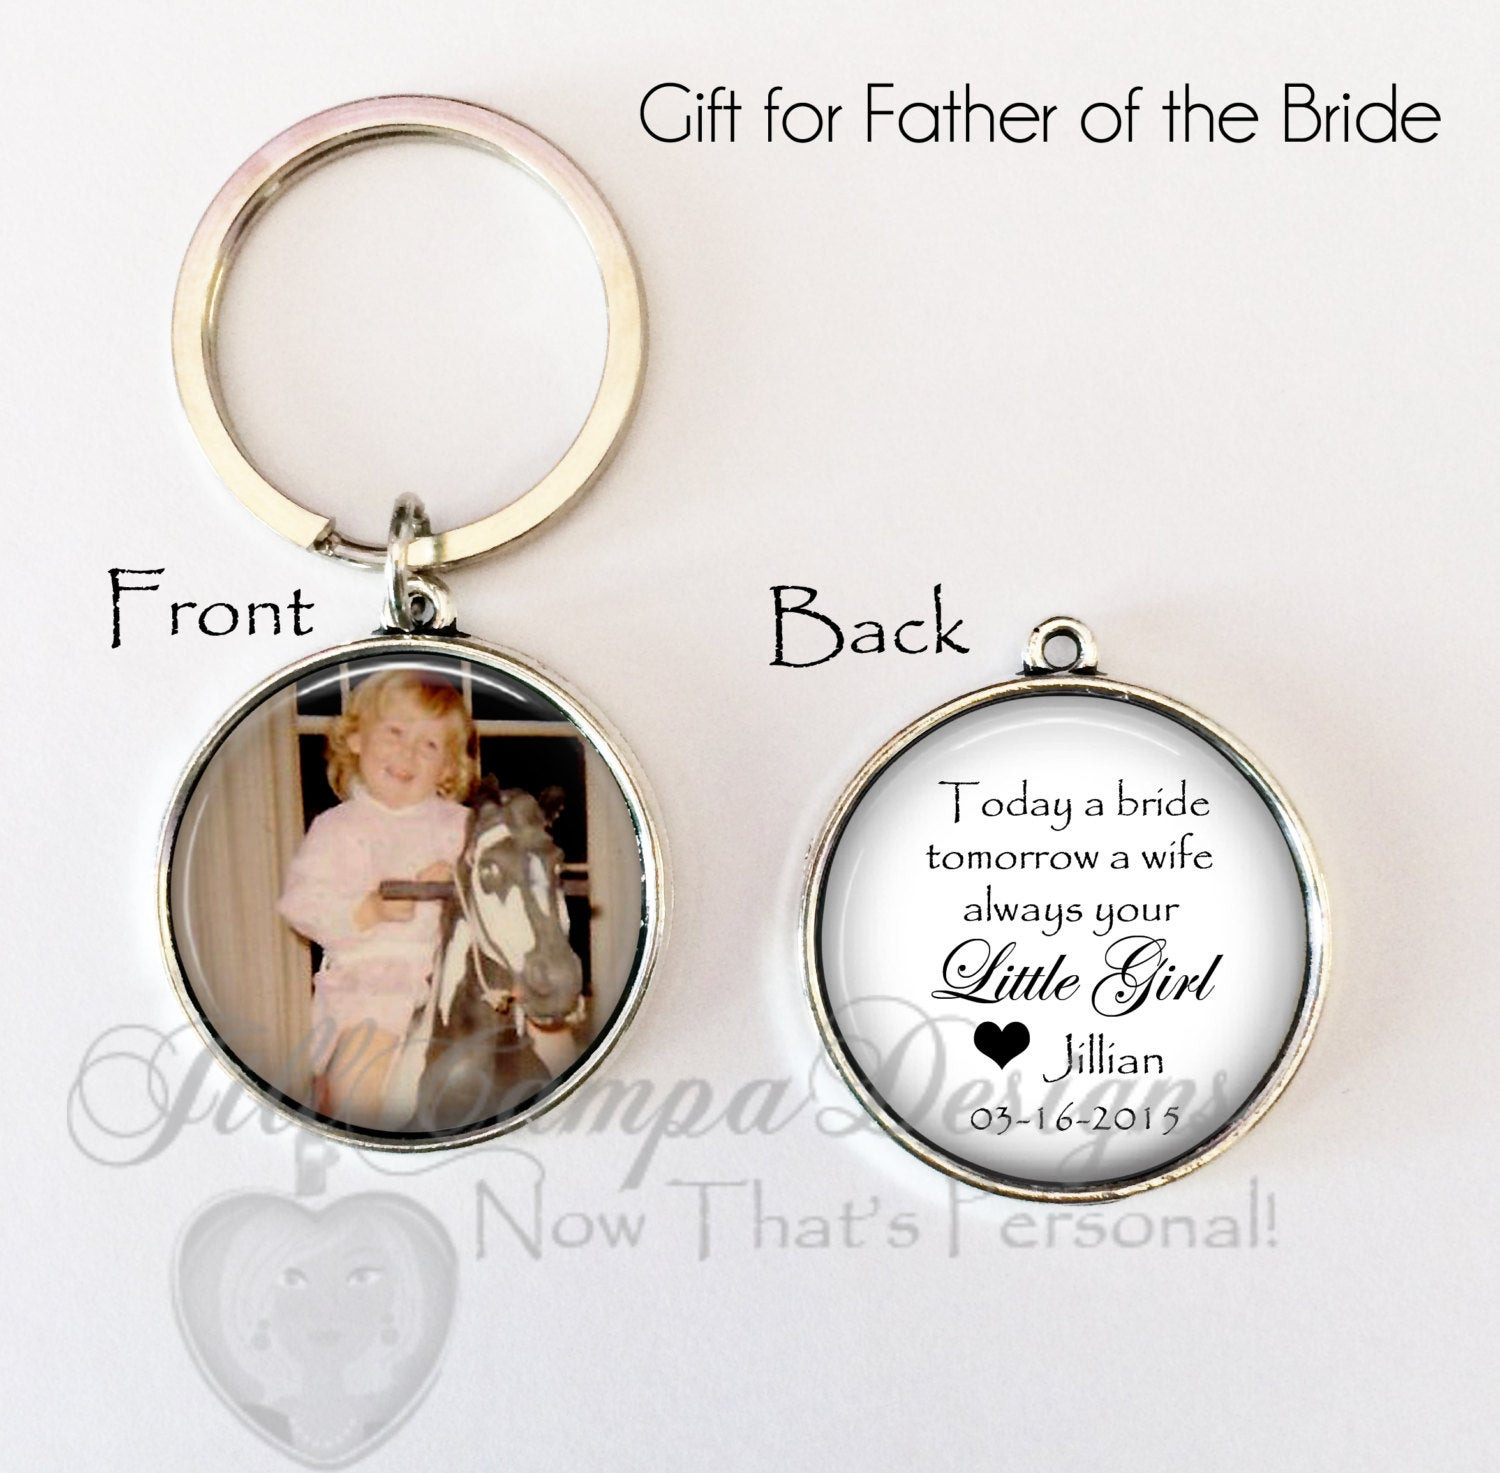 Gift Ideas For Father Of The Bride
 FATHER of the BRIDE GIFT Bride s t to Dad on wedding